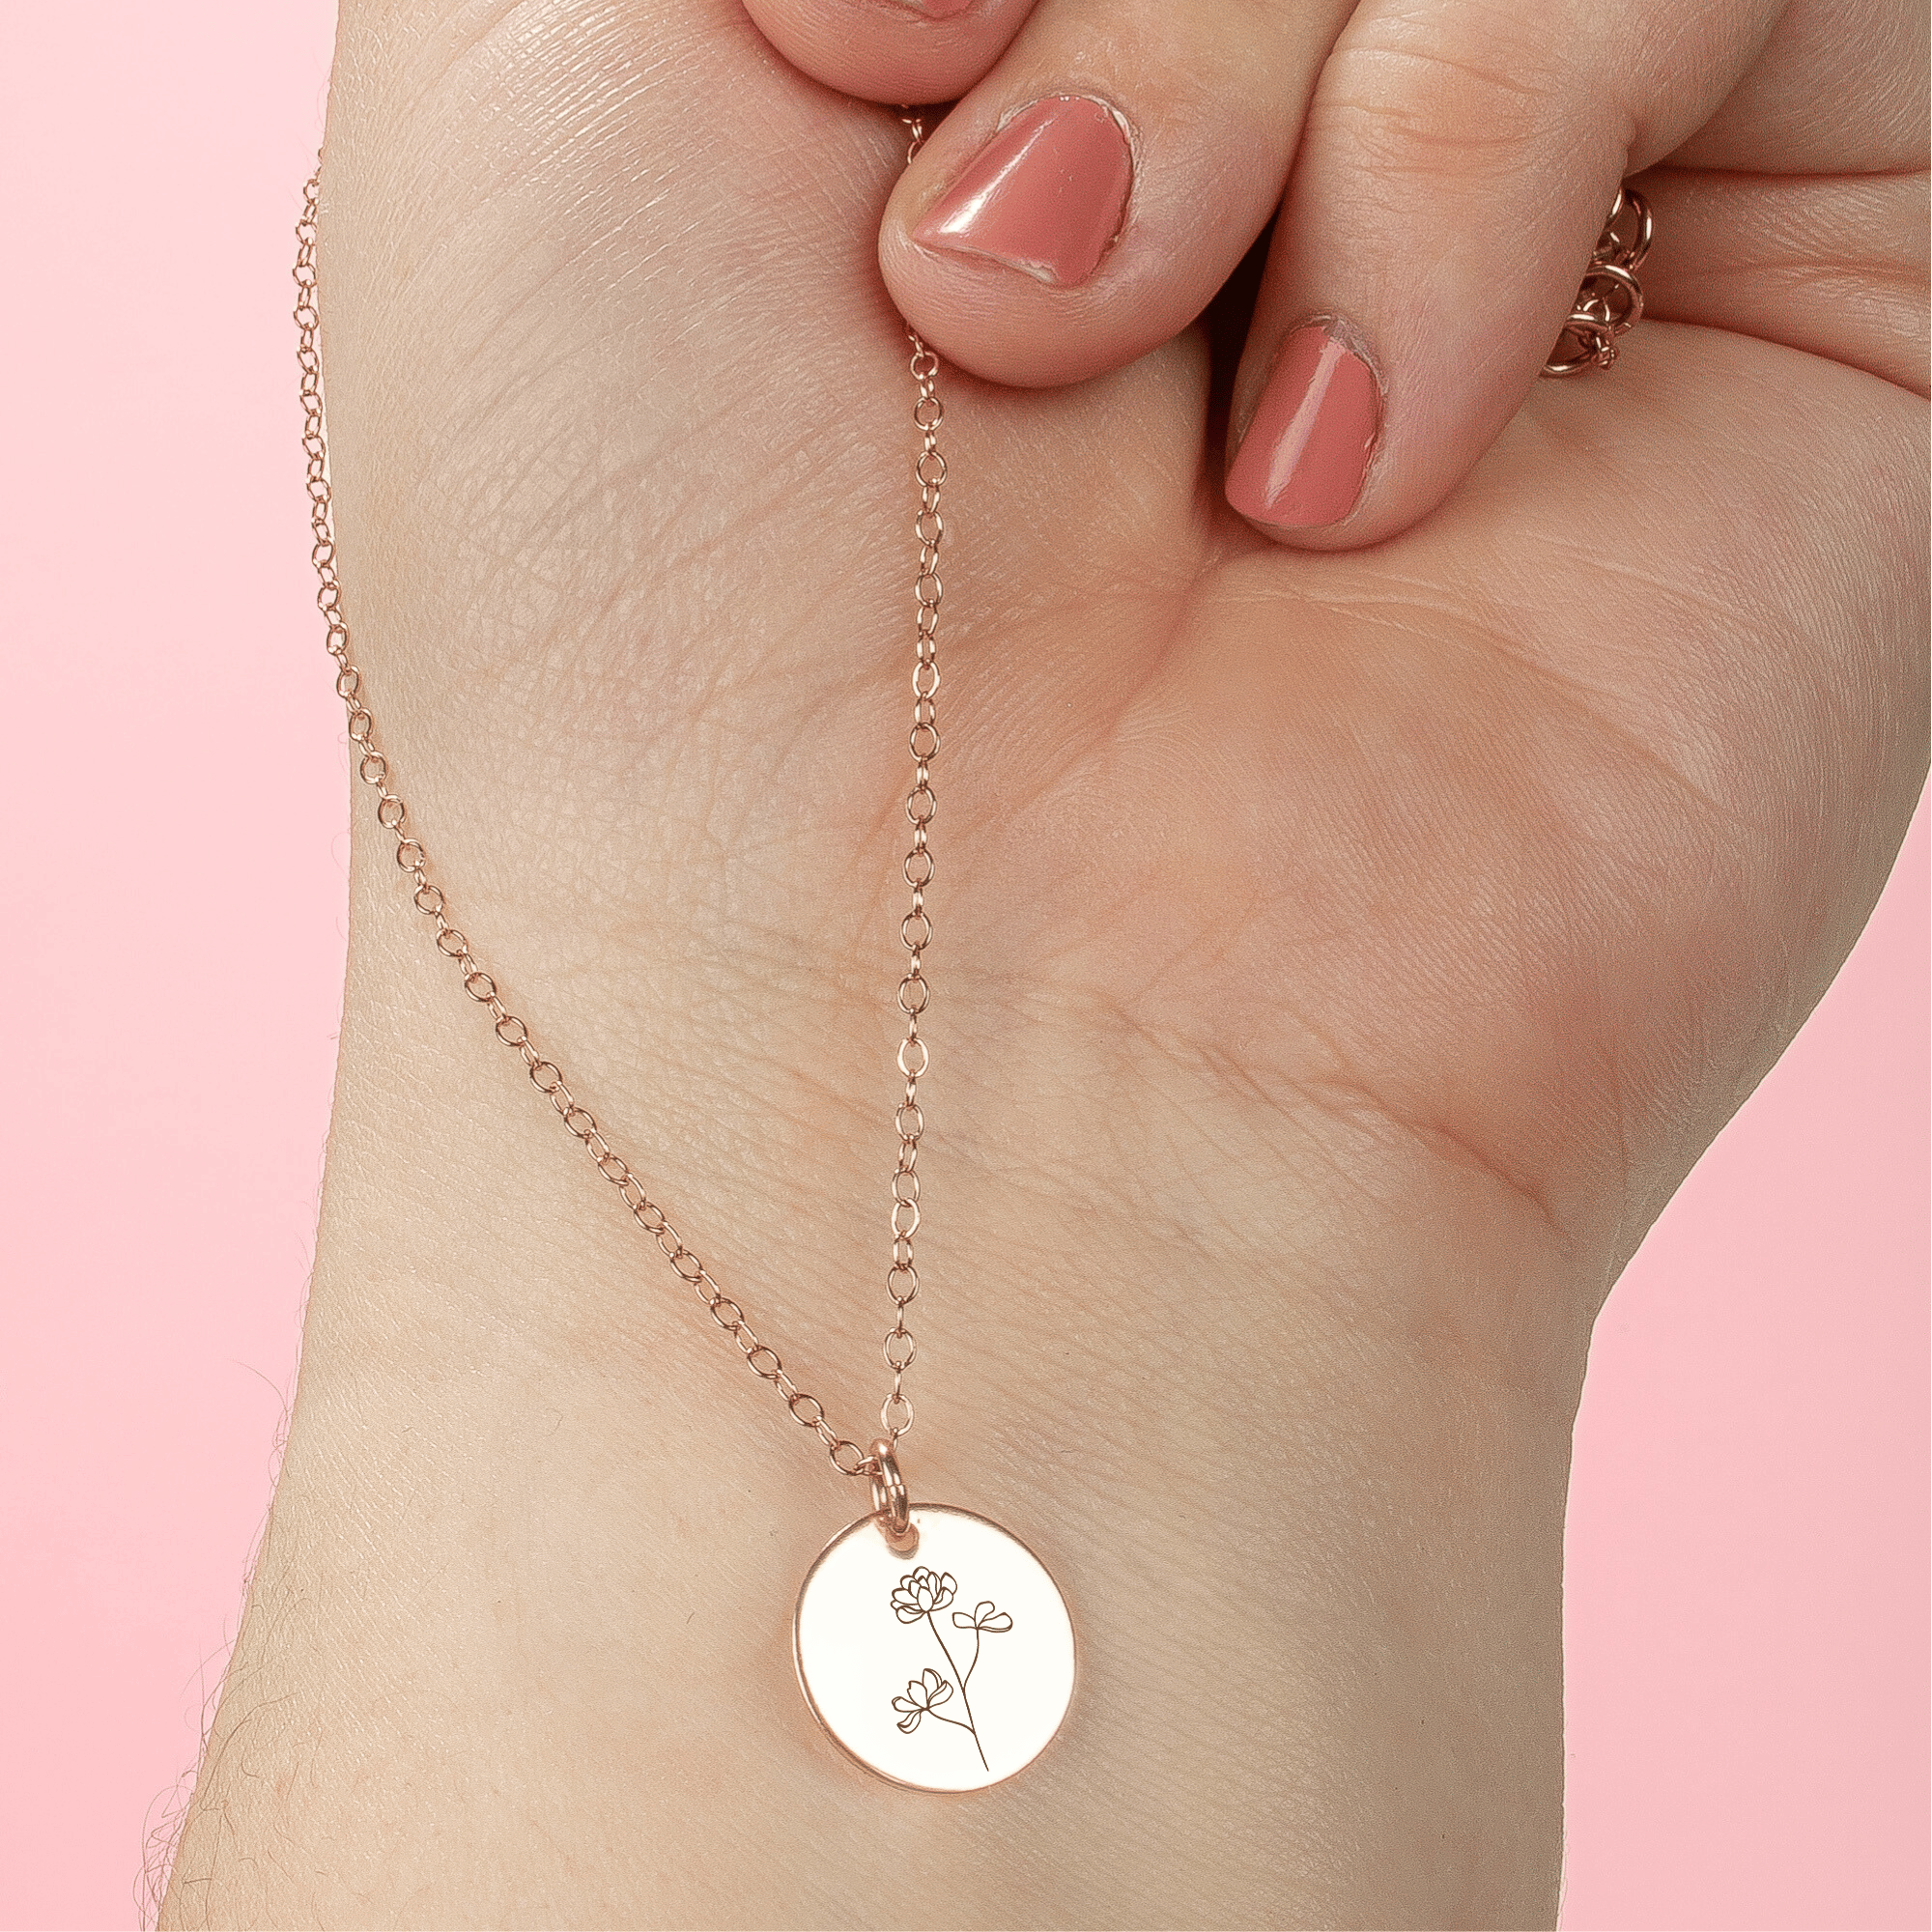 Peony Flowers Disc Necklace - Melanie Golden Jewelry - bridesmaid, disc necklaces, Engraved Jewelry, everyday, flora, minimal minimal necklace, minimal necklace, necklace, necklaces, symbolic, wedding, wedding party